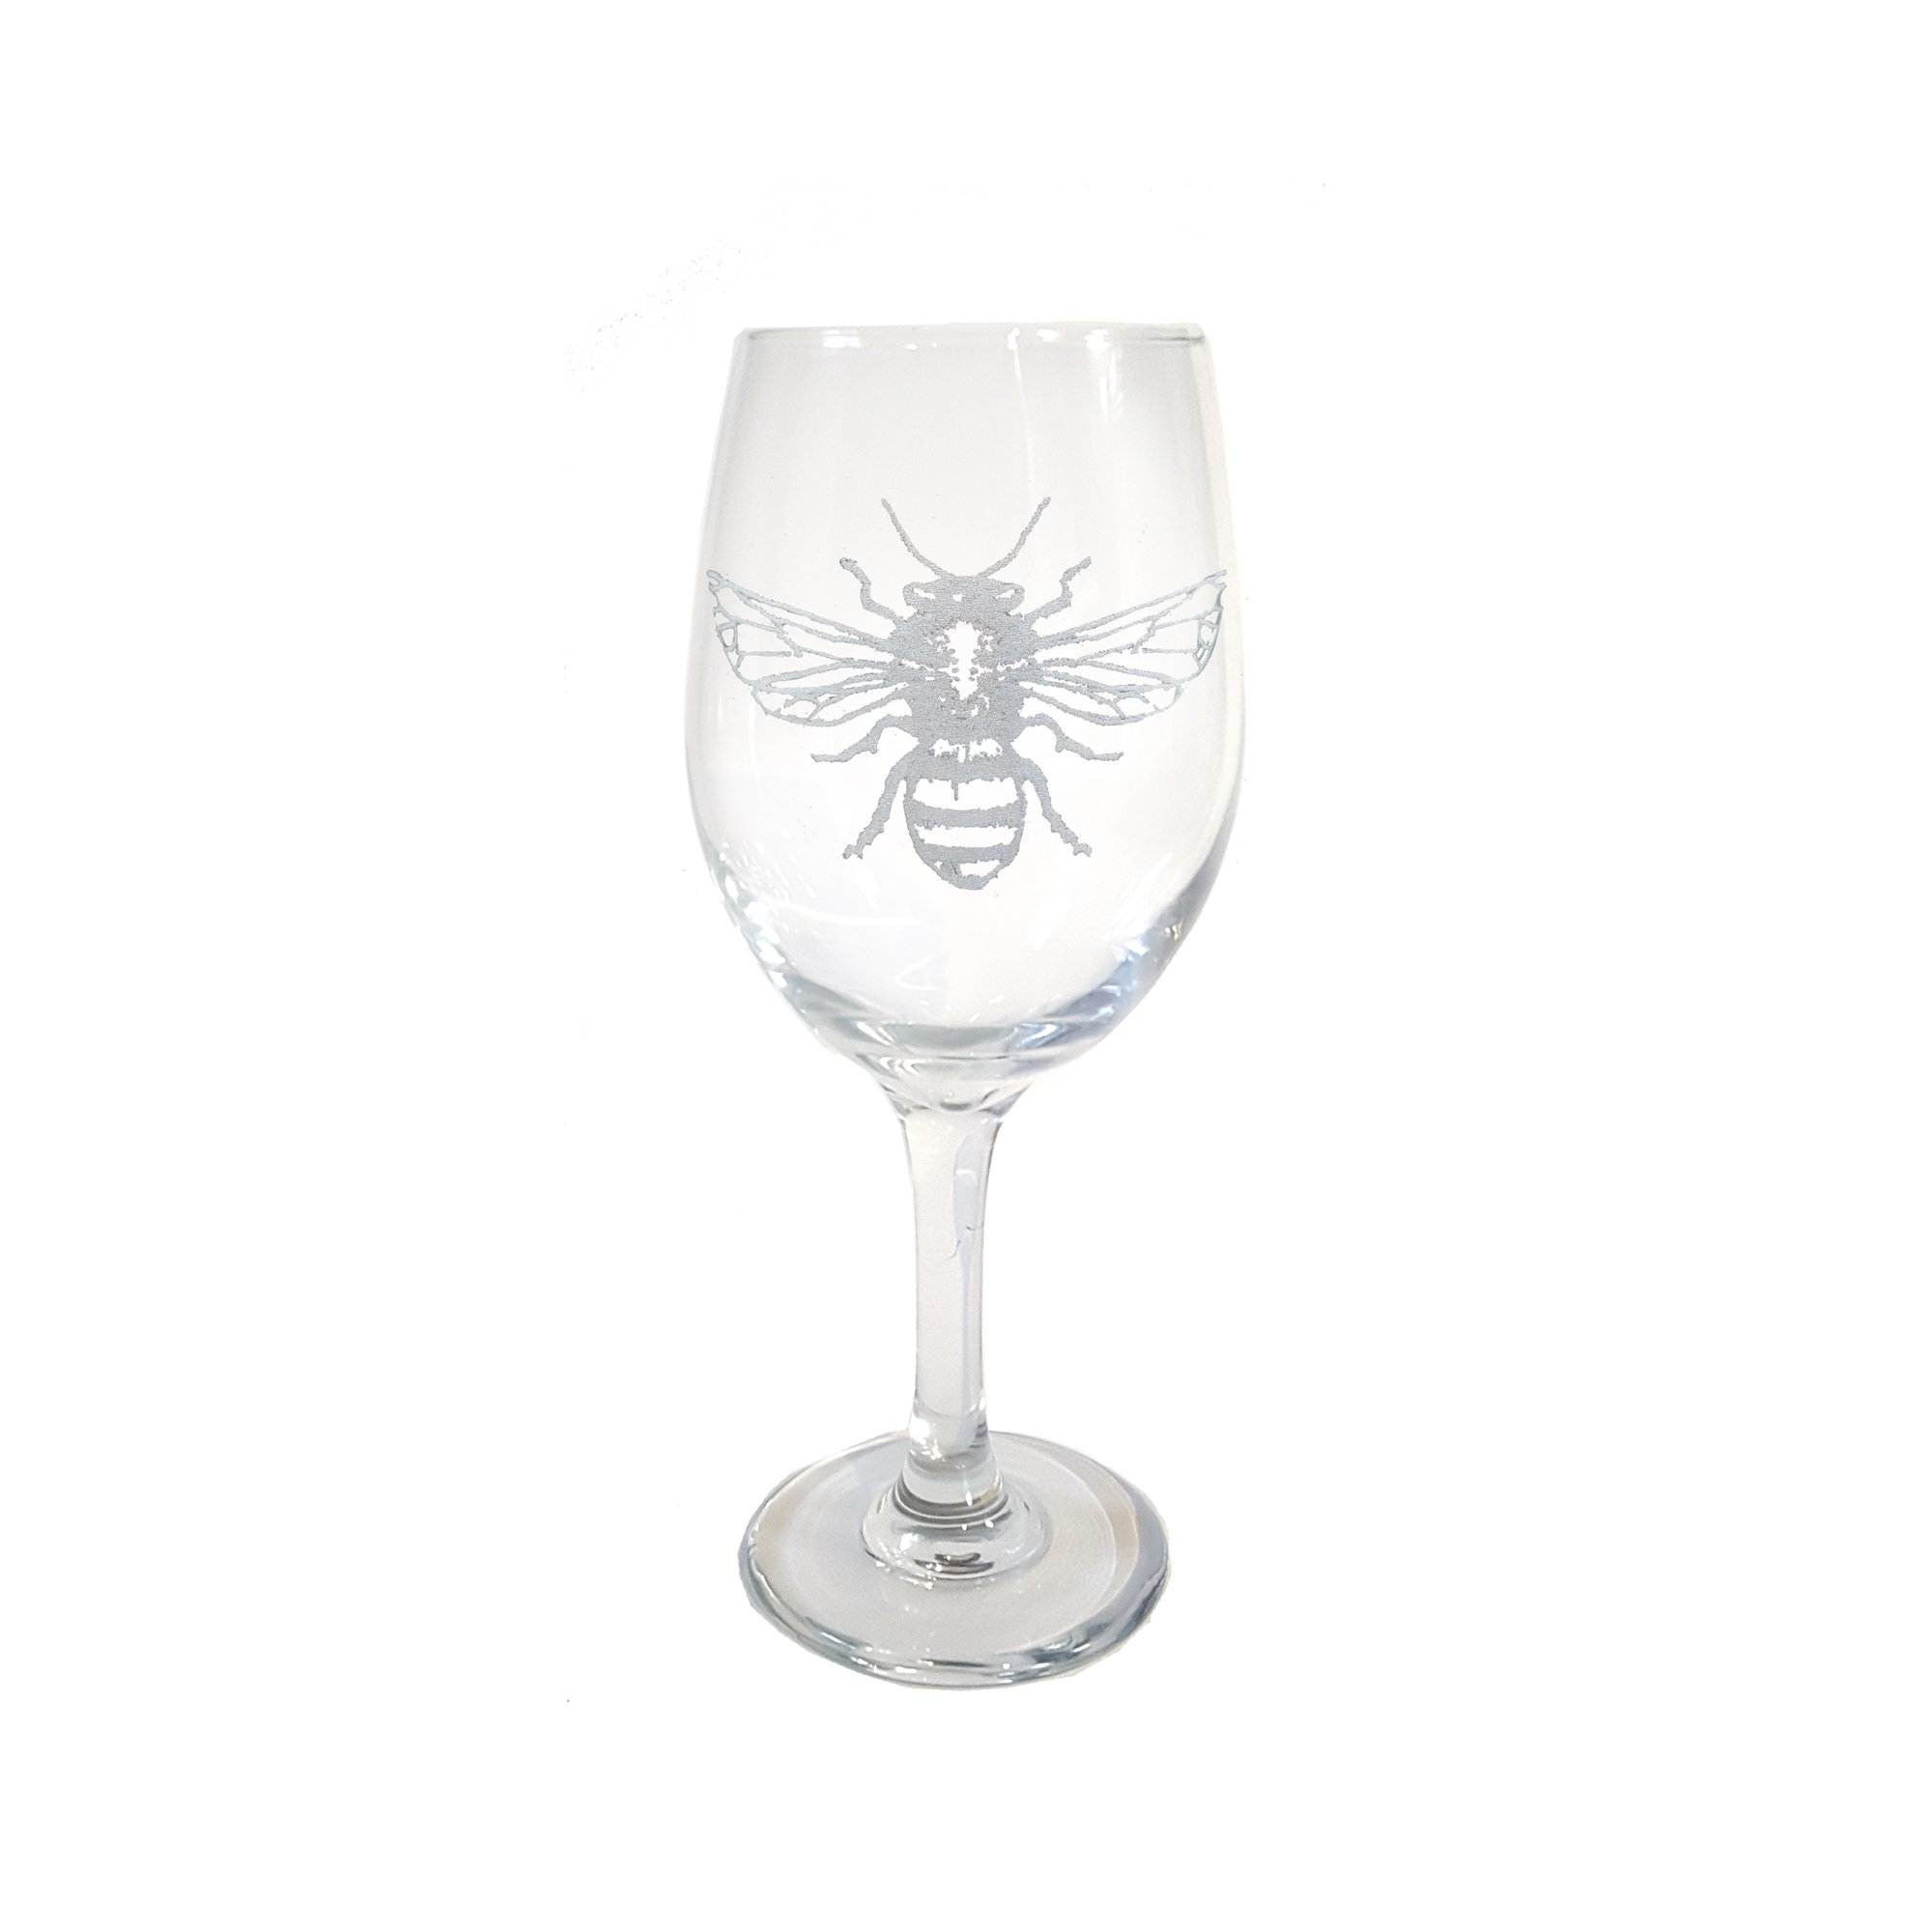 Swallowtail Butterfly Stemless Wine Glass Custom Etched Artisan Wine Glass Free Personalized Engraving 